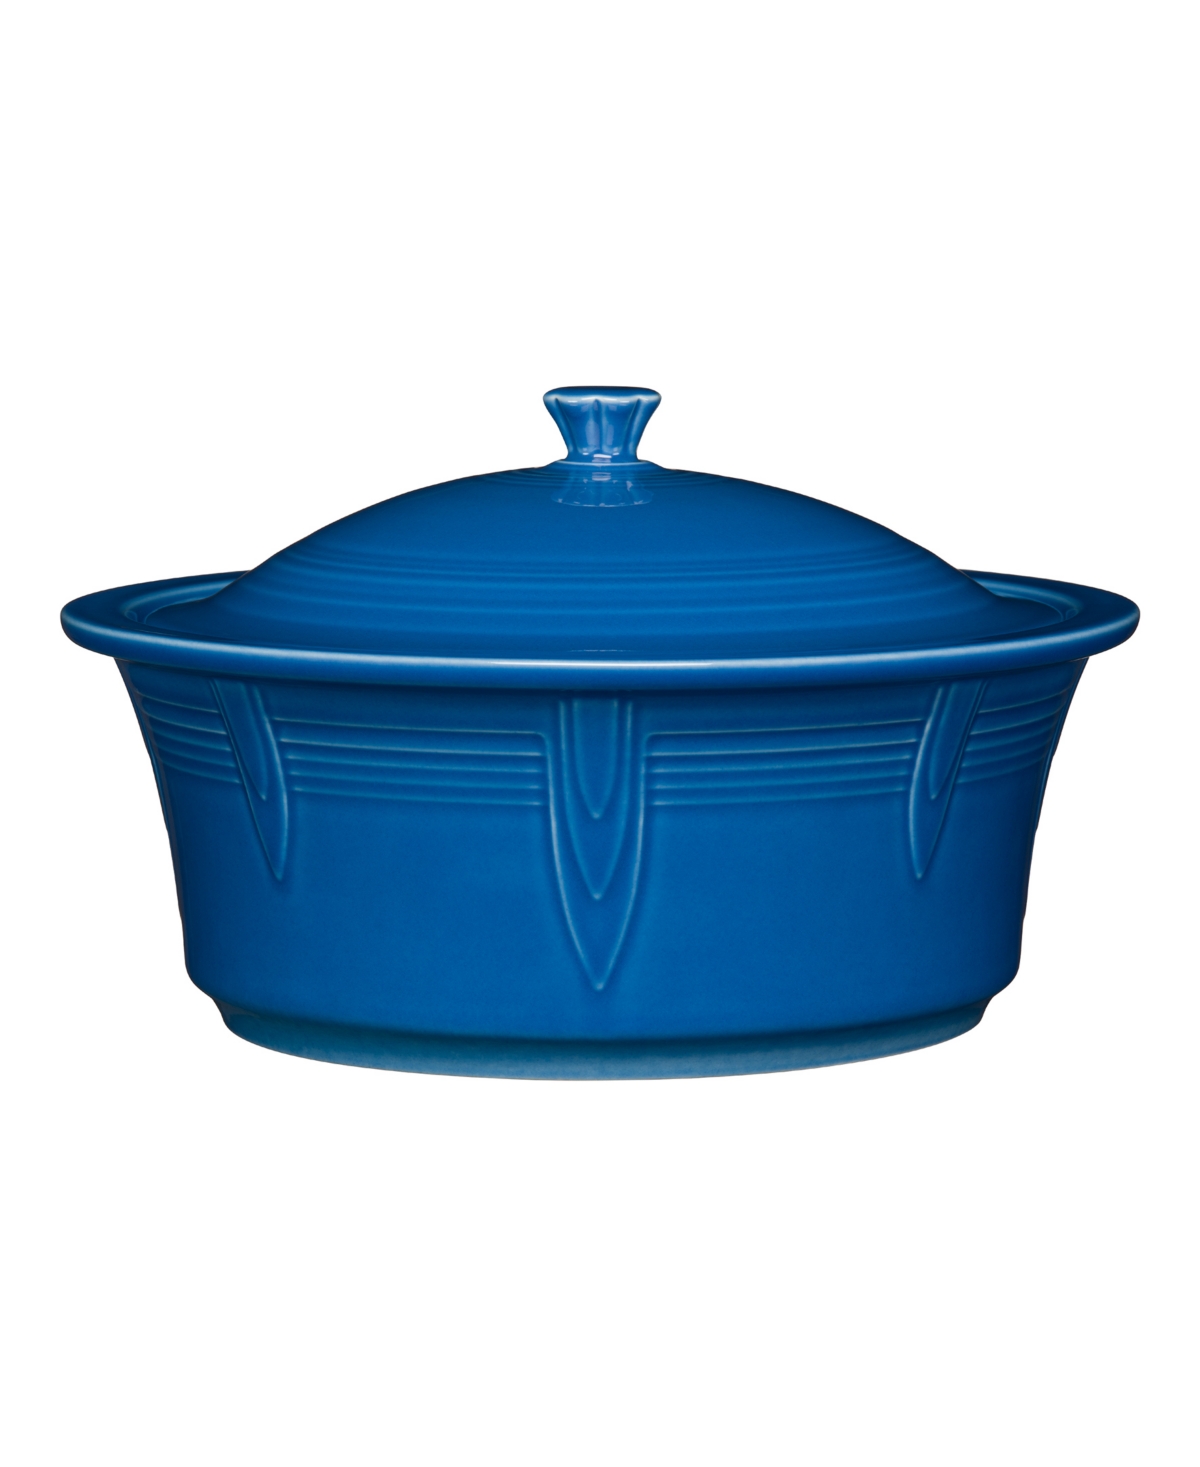 Fiesta Large Covered Casserole 90 Oz. In Lapis